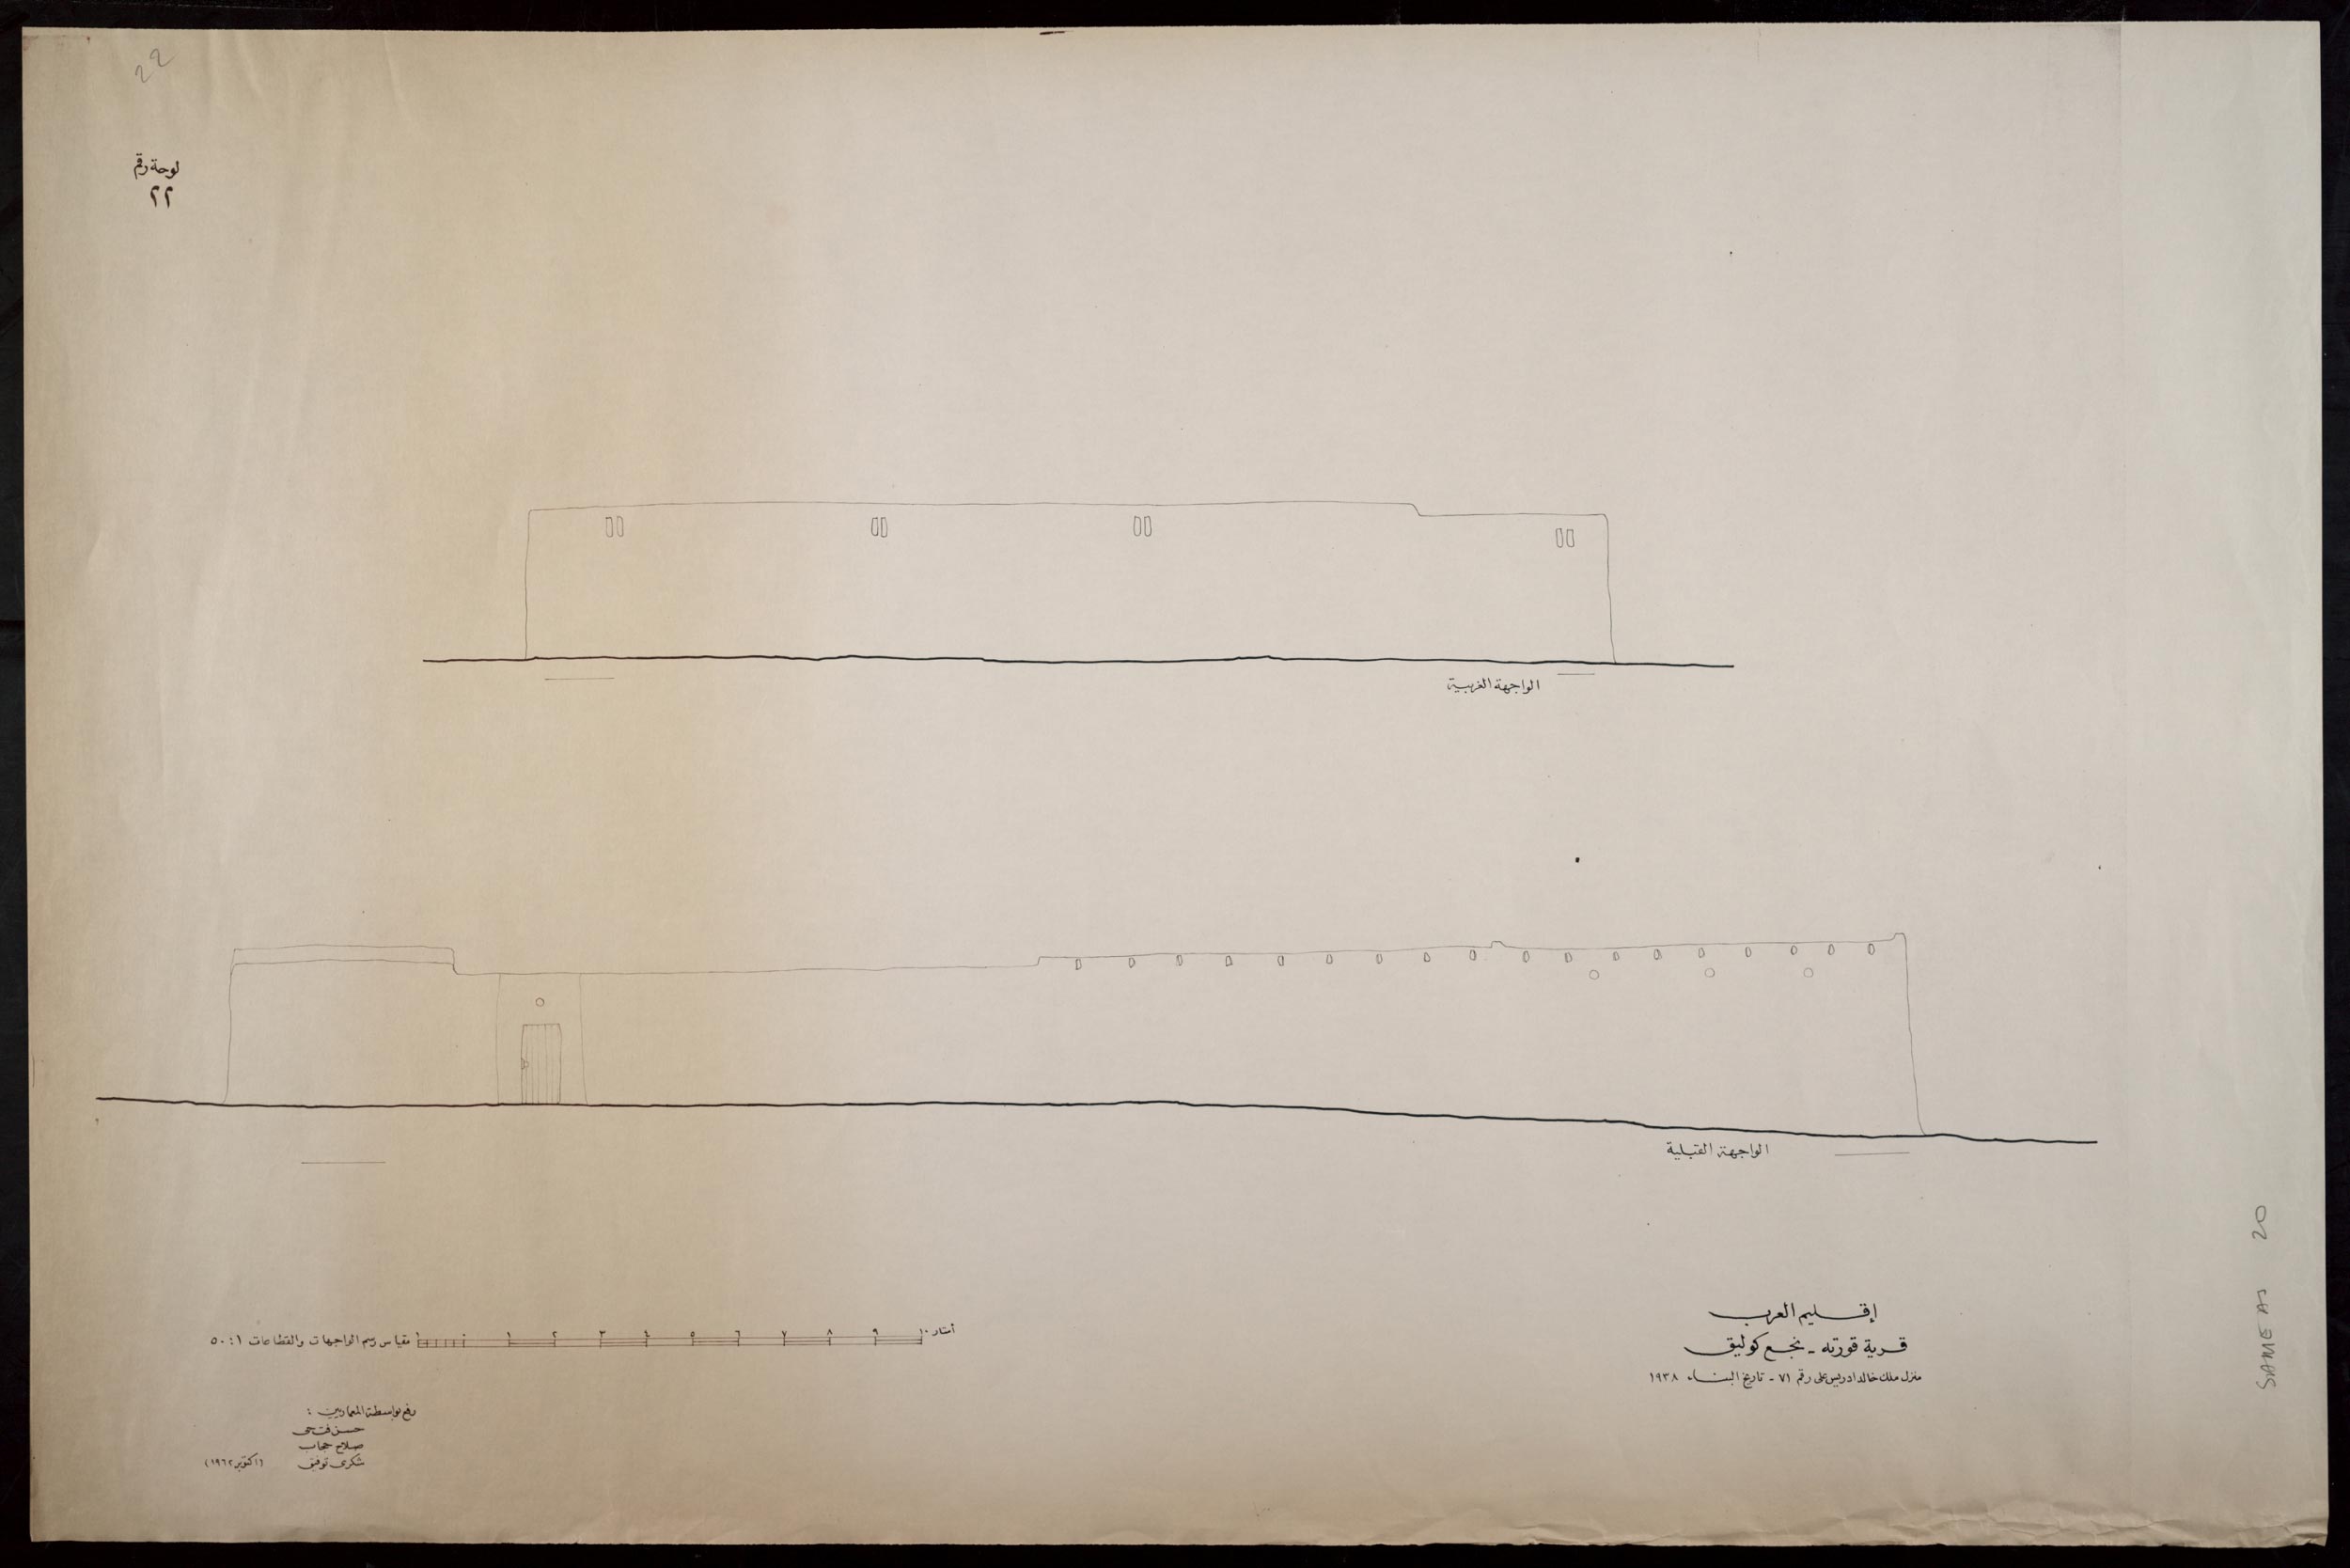 West and south elevational drawings.